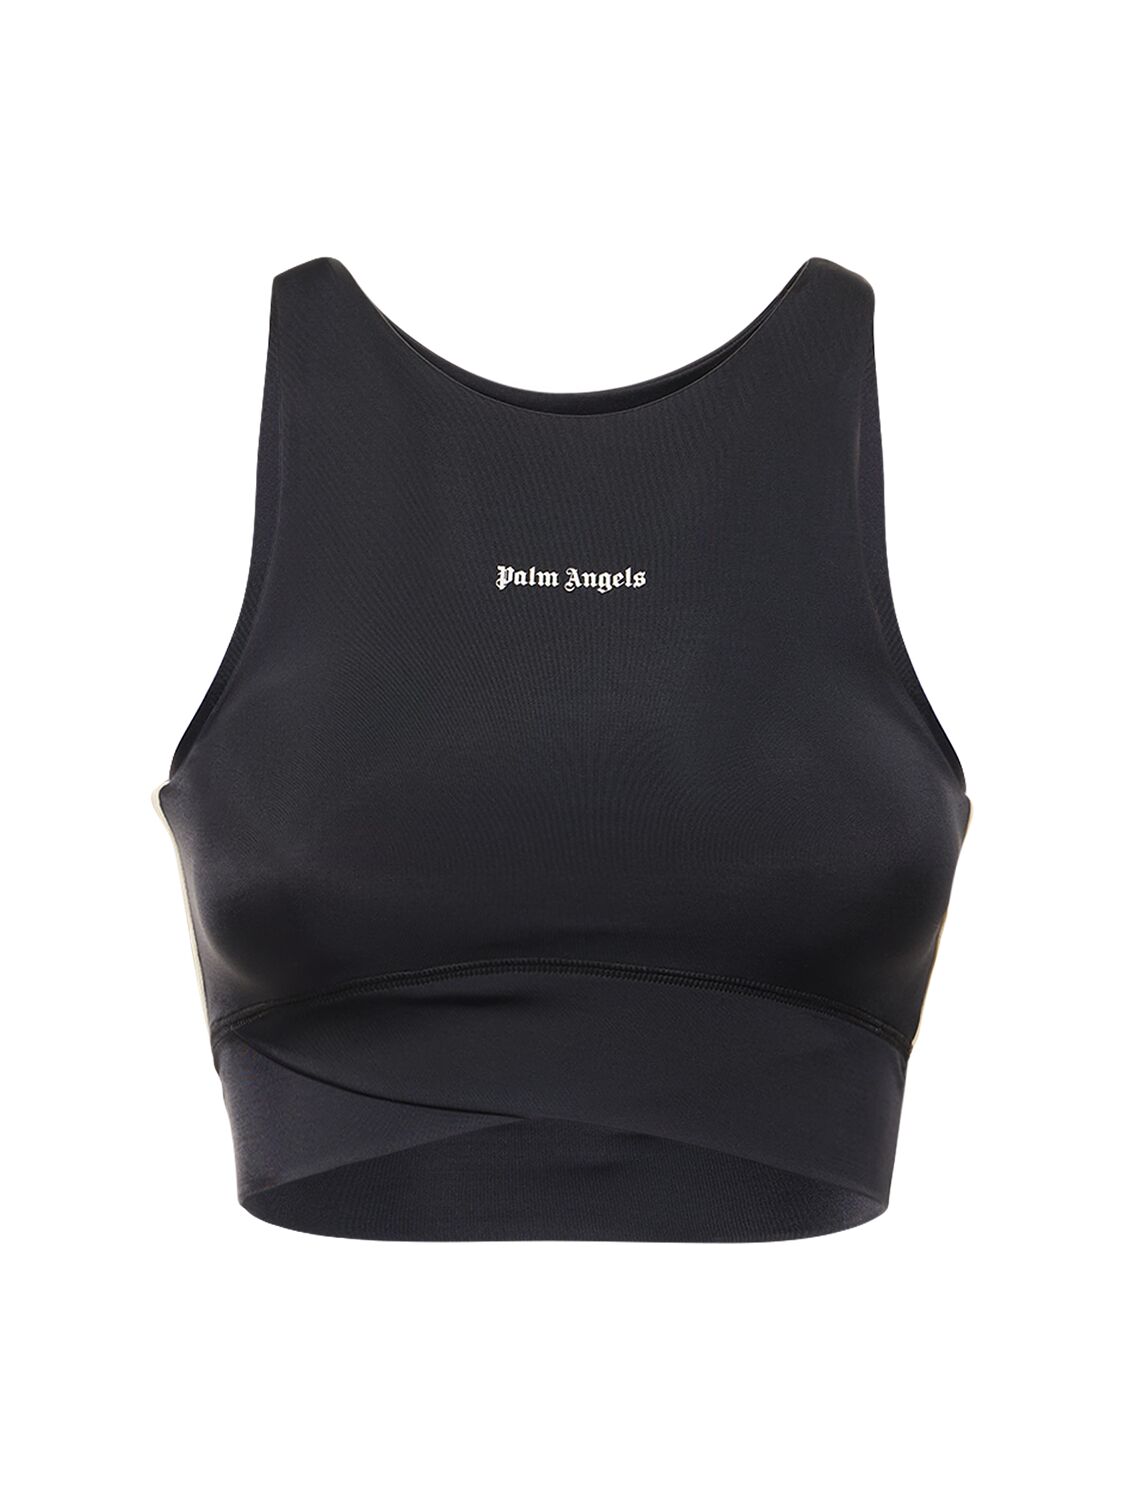 Classic Logo Bra in grey - Palm Angels® Official